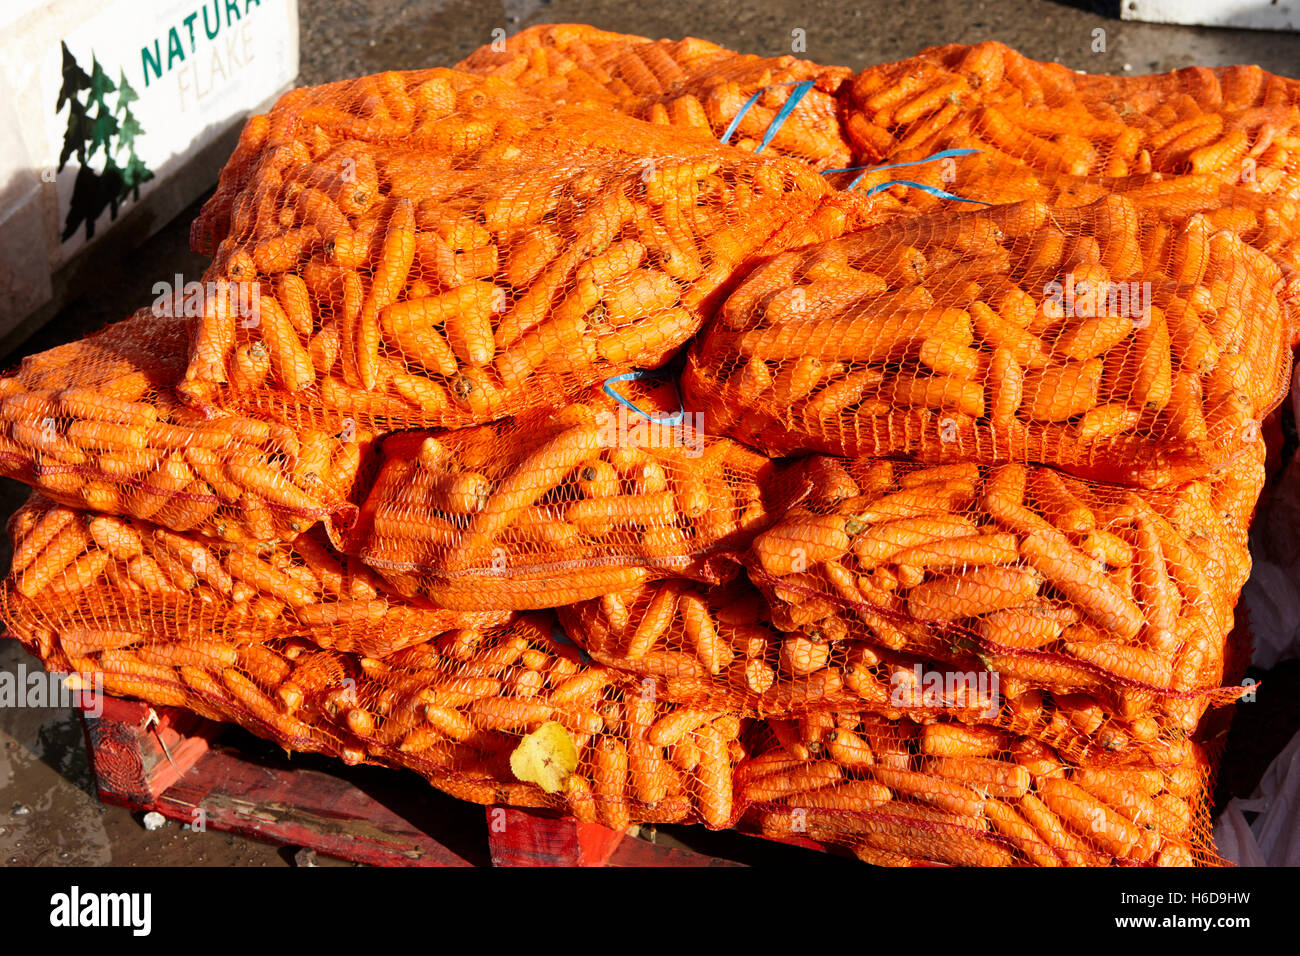 bags of carrots for sale at a farmers market in rural england Stock Photo